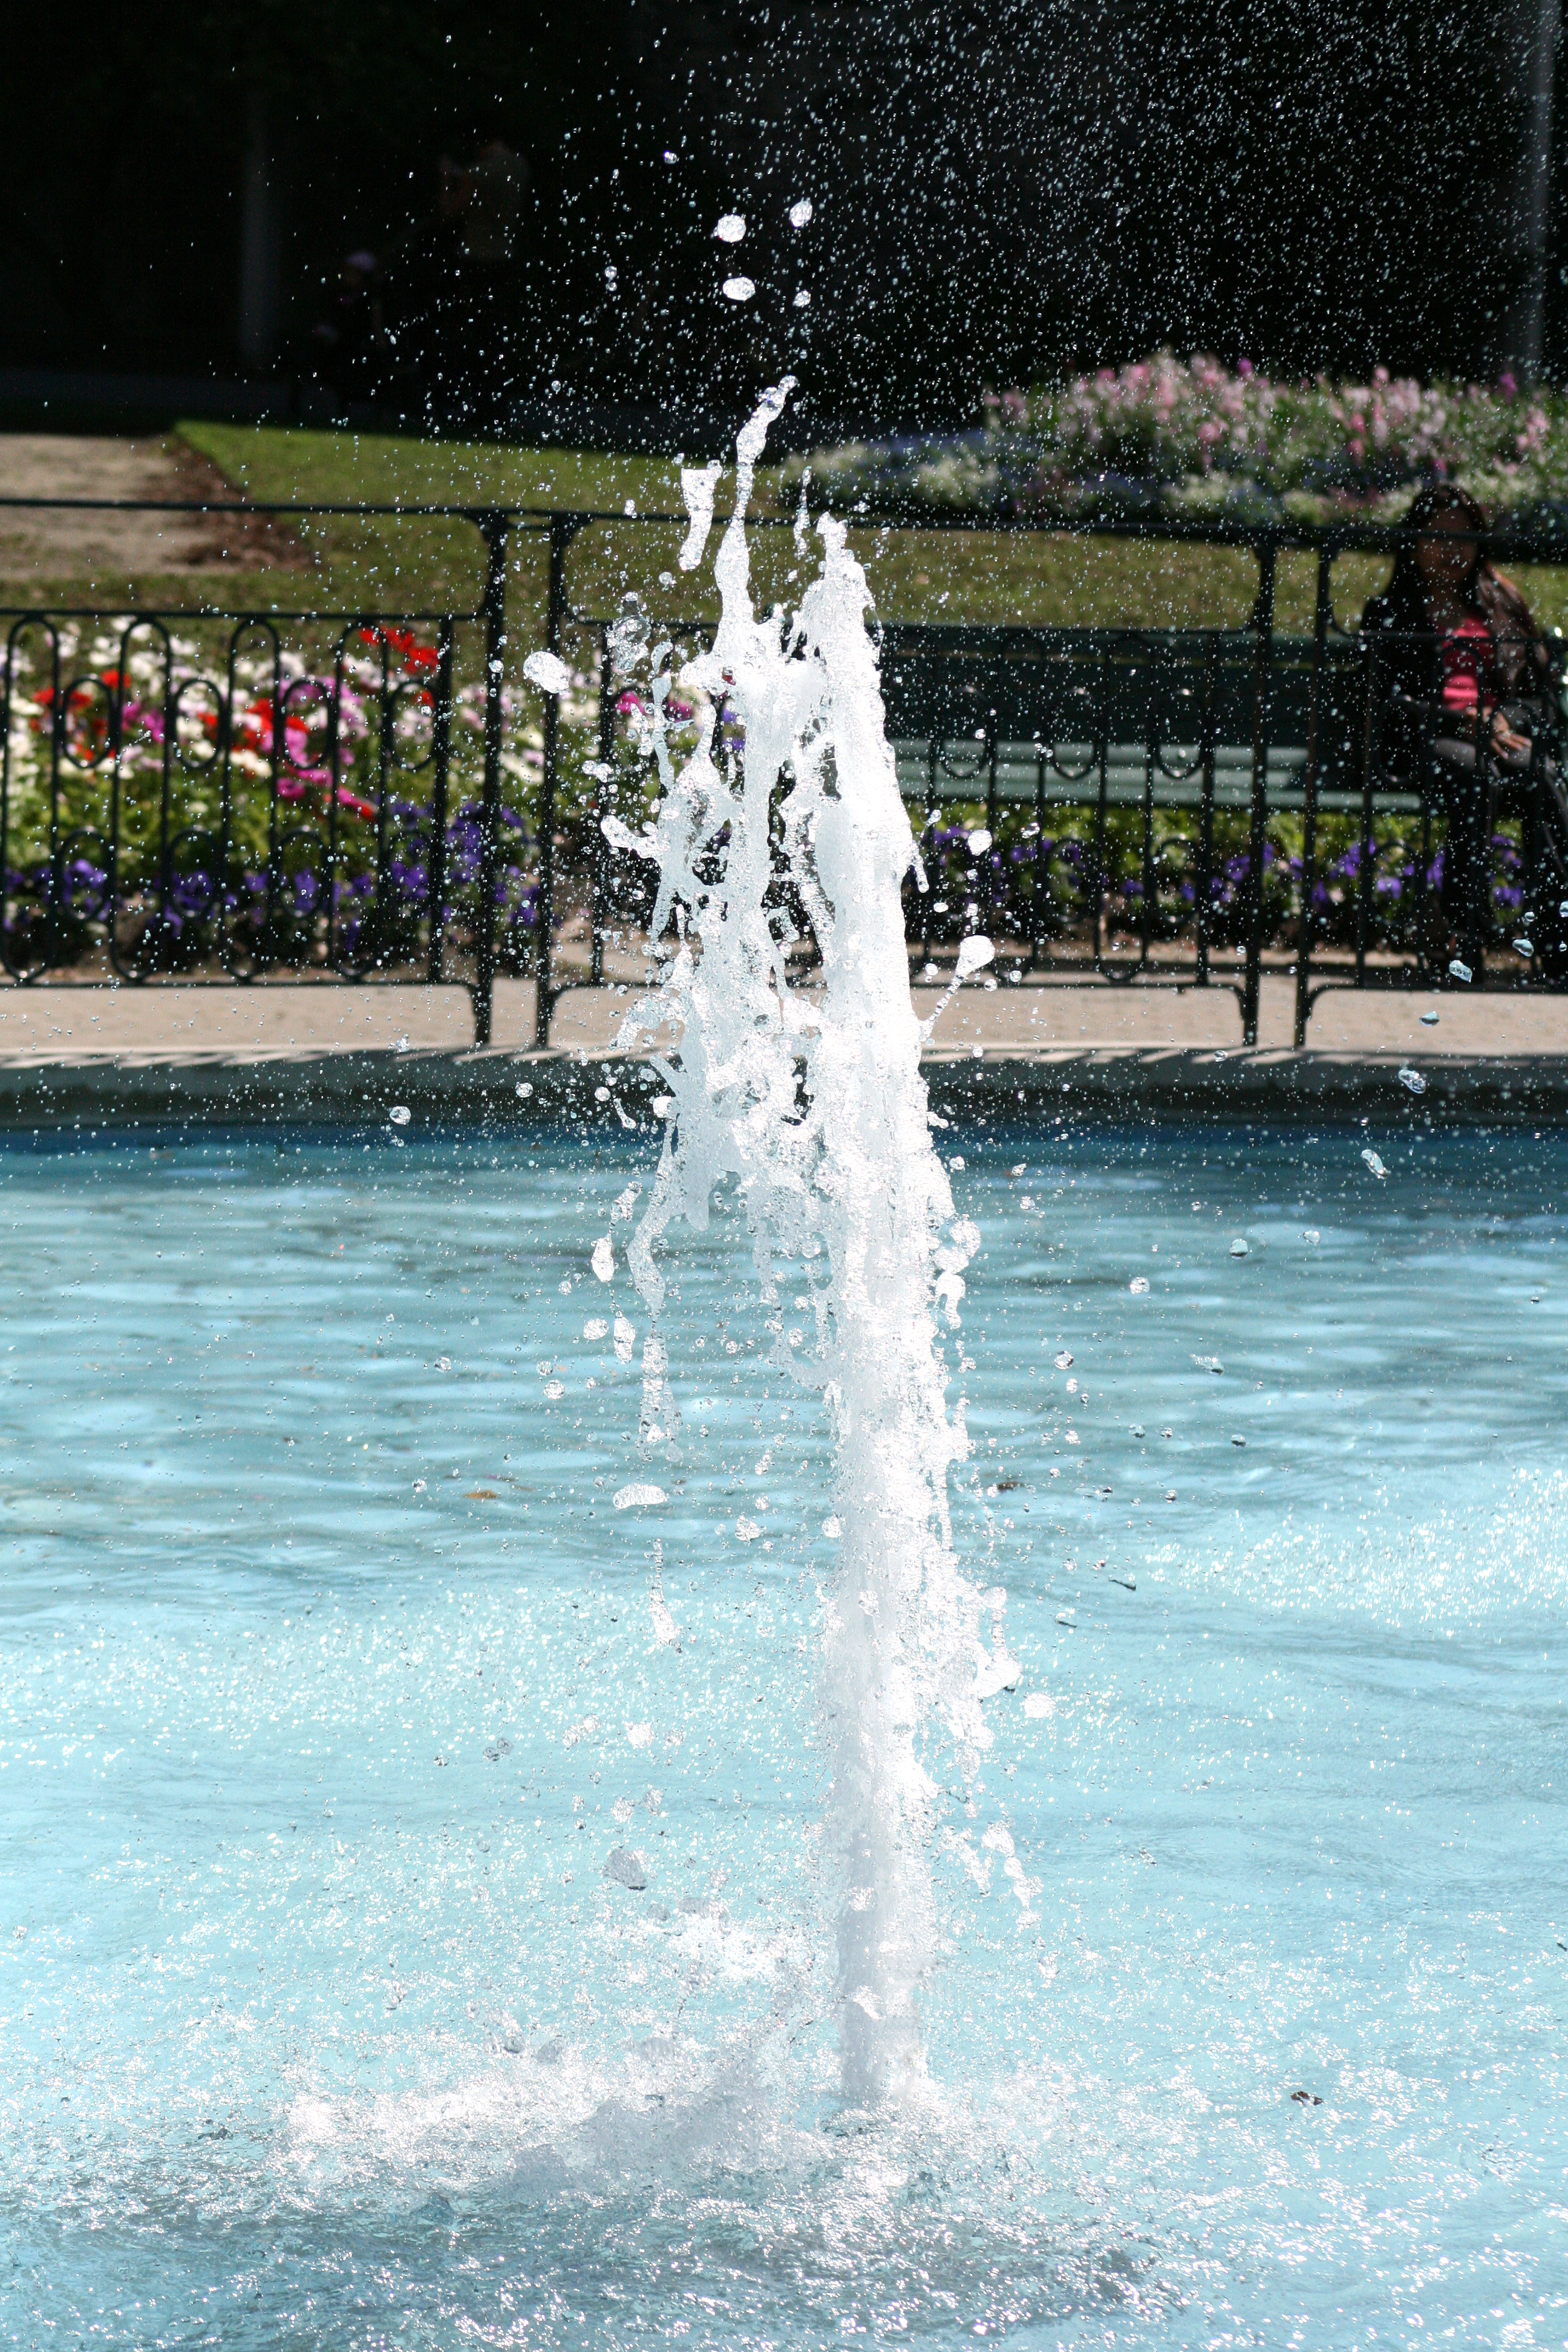 File:Water fountain at the Peacock Fountain.jpg - Wikimedia Commons